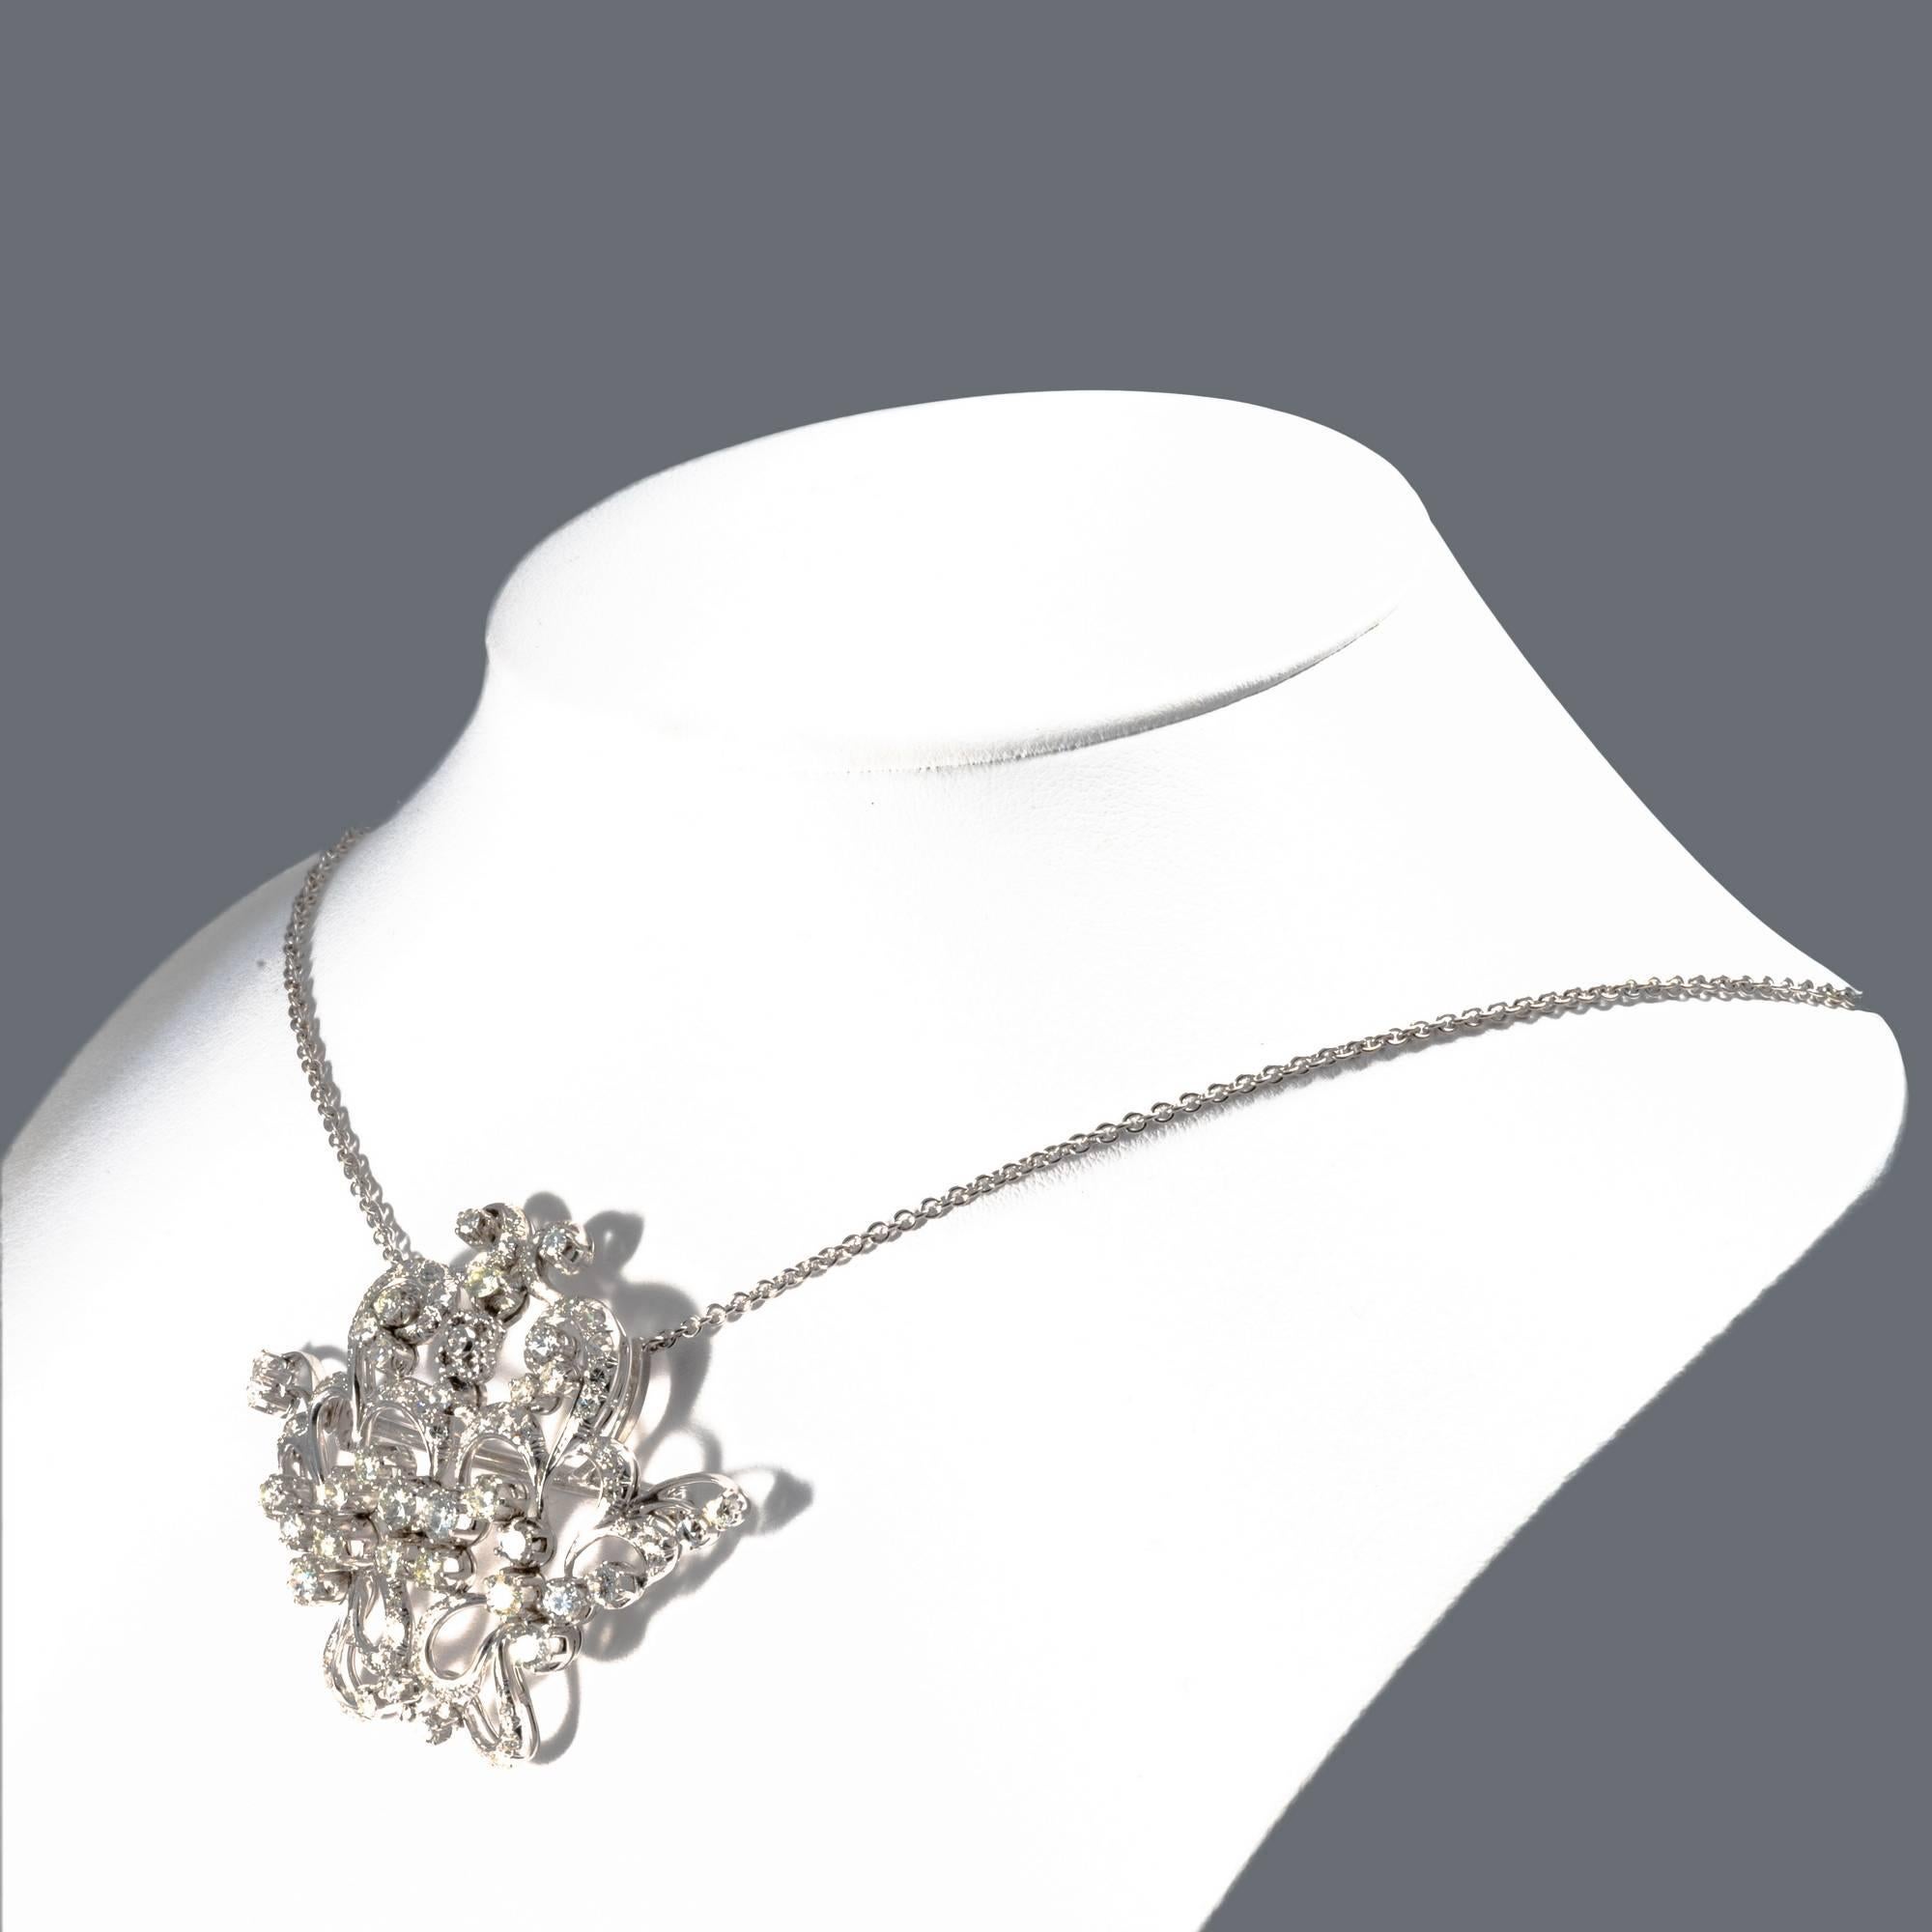 This original white gold  vintage  brooch has a beautiful garland design, which makes this jewel ideal to dress up any evening attire, ranging from the classic little black dress to the most magnificent ball gown. Thanks to the white gold chain, it